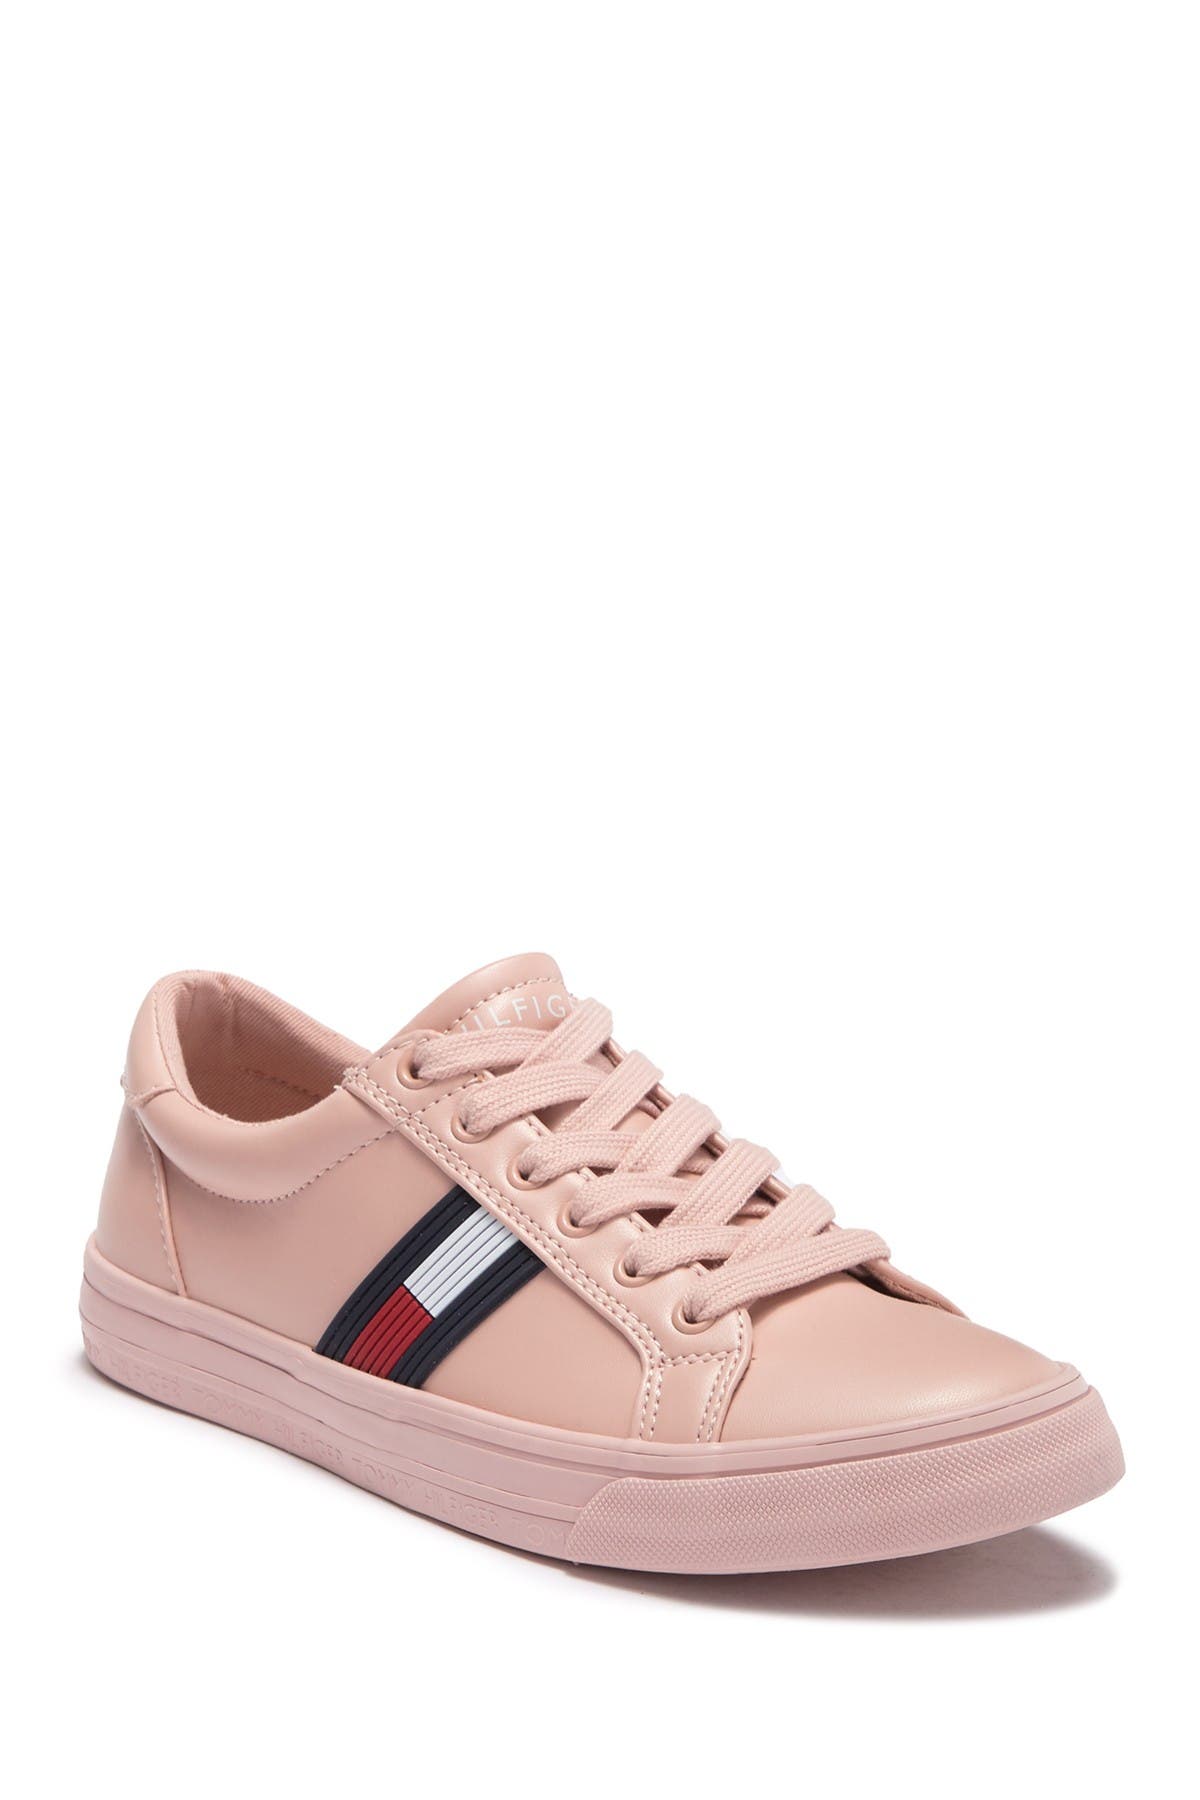 Tommy Hilfiger | Oneas Lace-Up Sneaker 